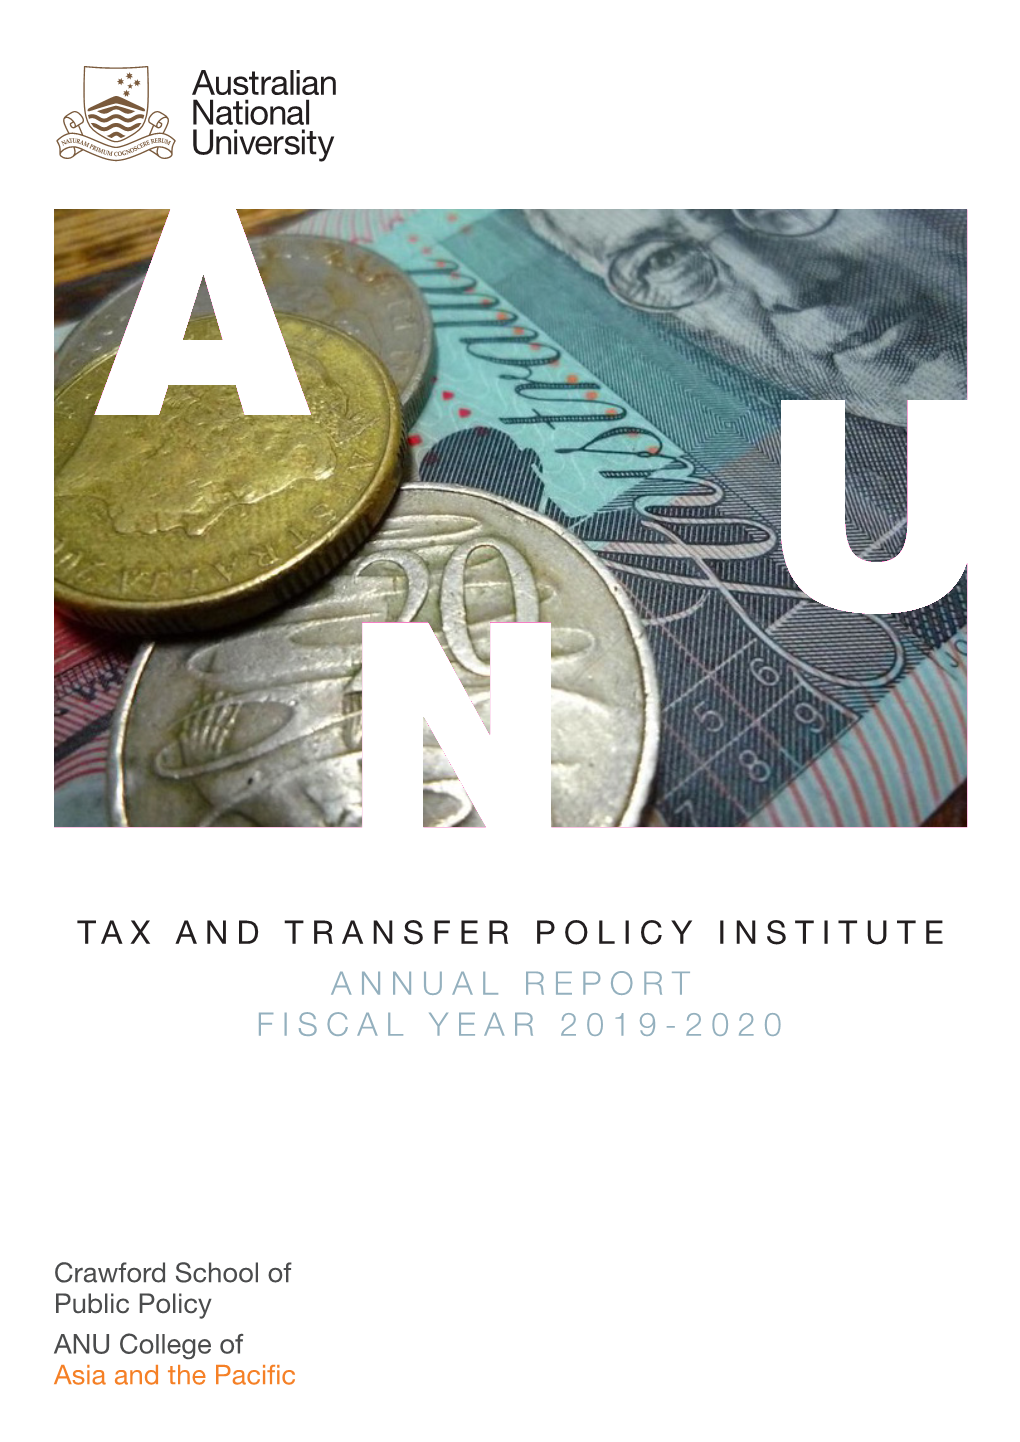 Tax and Transfer Policy Institute Annual Report Fiscal Year 2019-2020